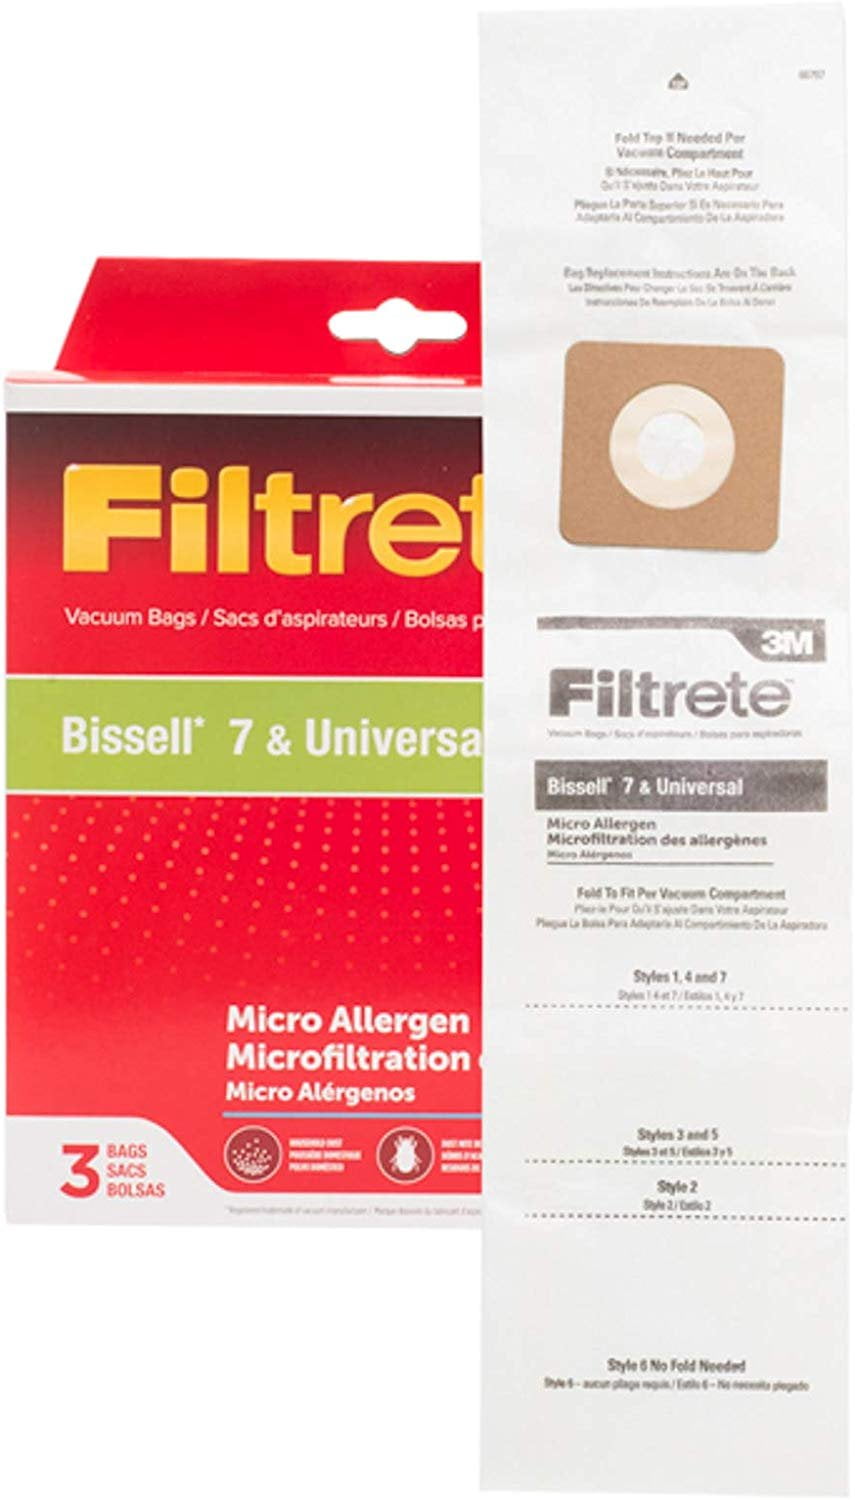 3 FILTRETE VACUUM BAGS BISSELL 7 & UNIVERSAL MICRO ALLERGEN POWERFORCE LIFT-OFF 